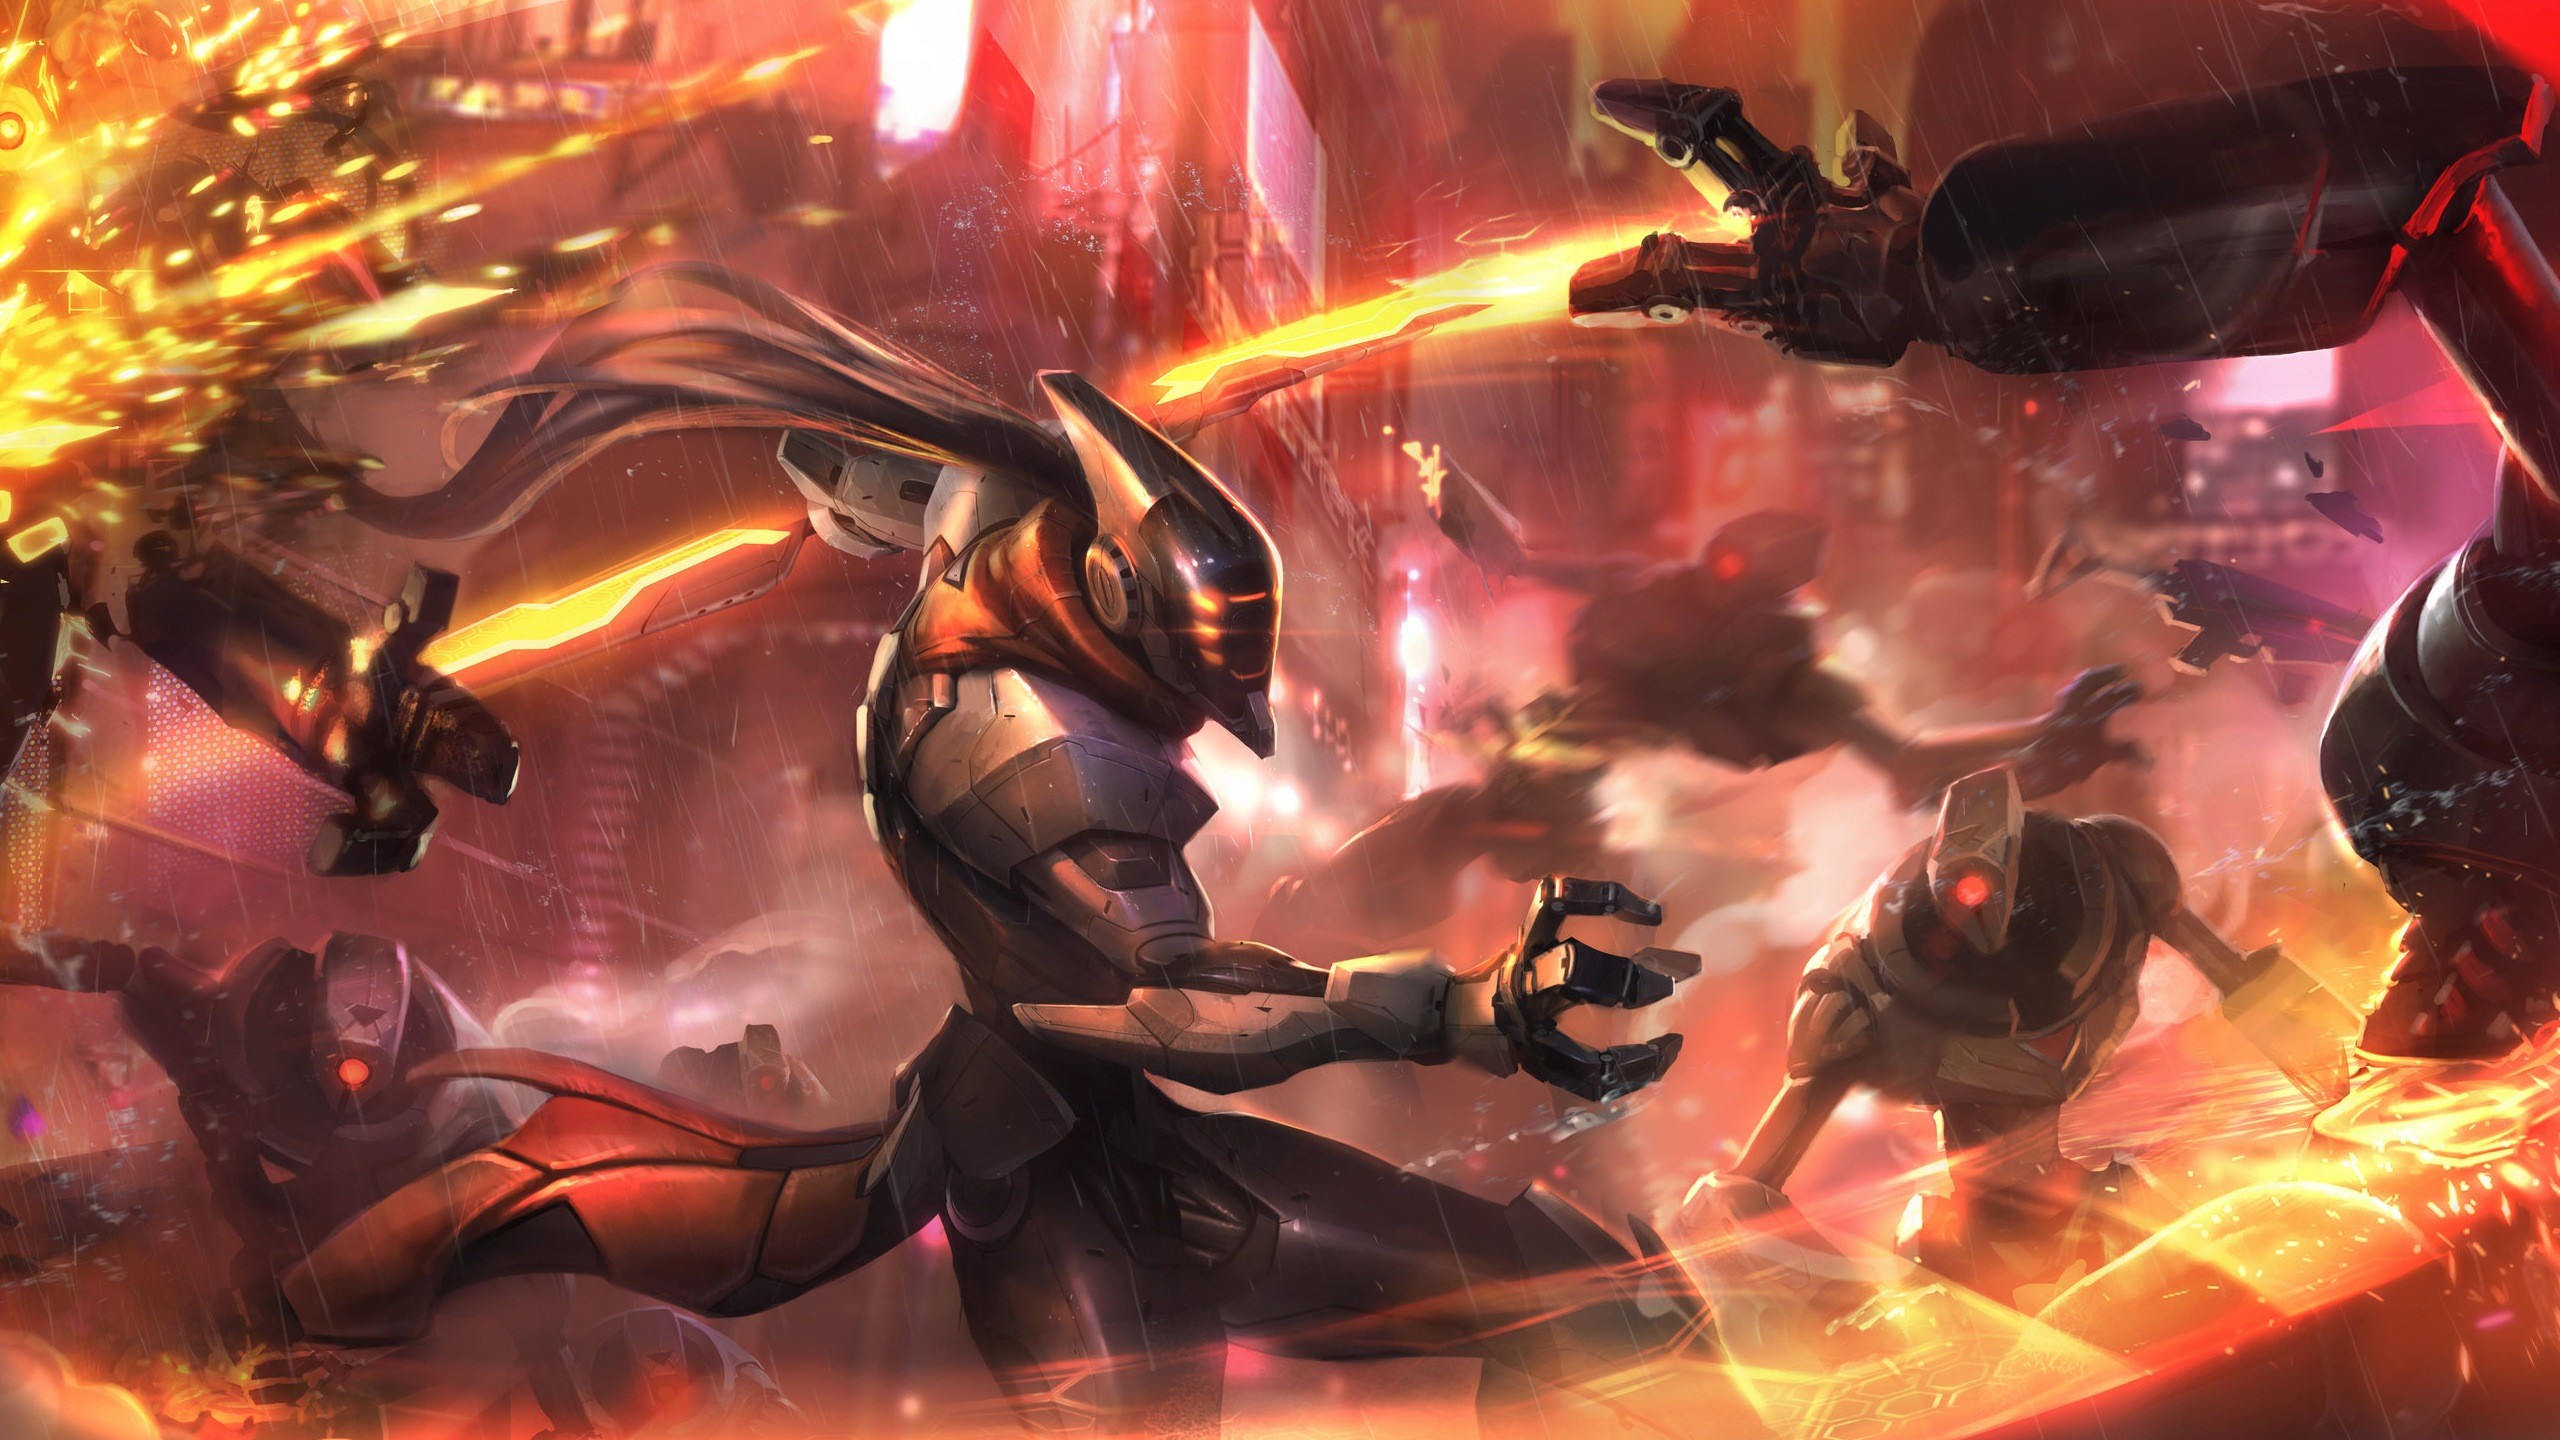 Download PROJECT Fiora Wallpaper Skin Art Fighting 1920×1080 Places to Visit Pinterest Skin art, Cosplay and Anime